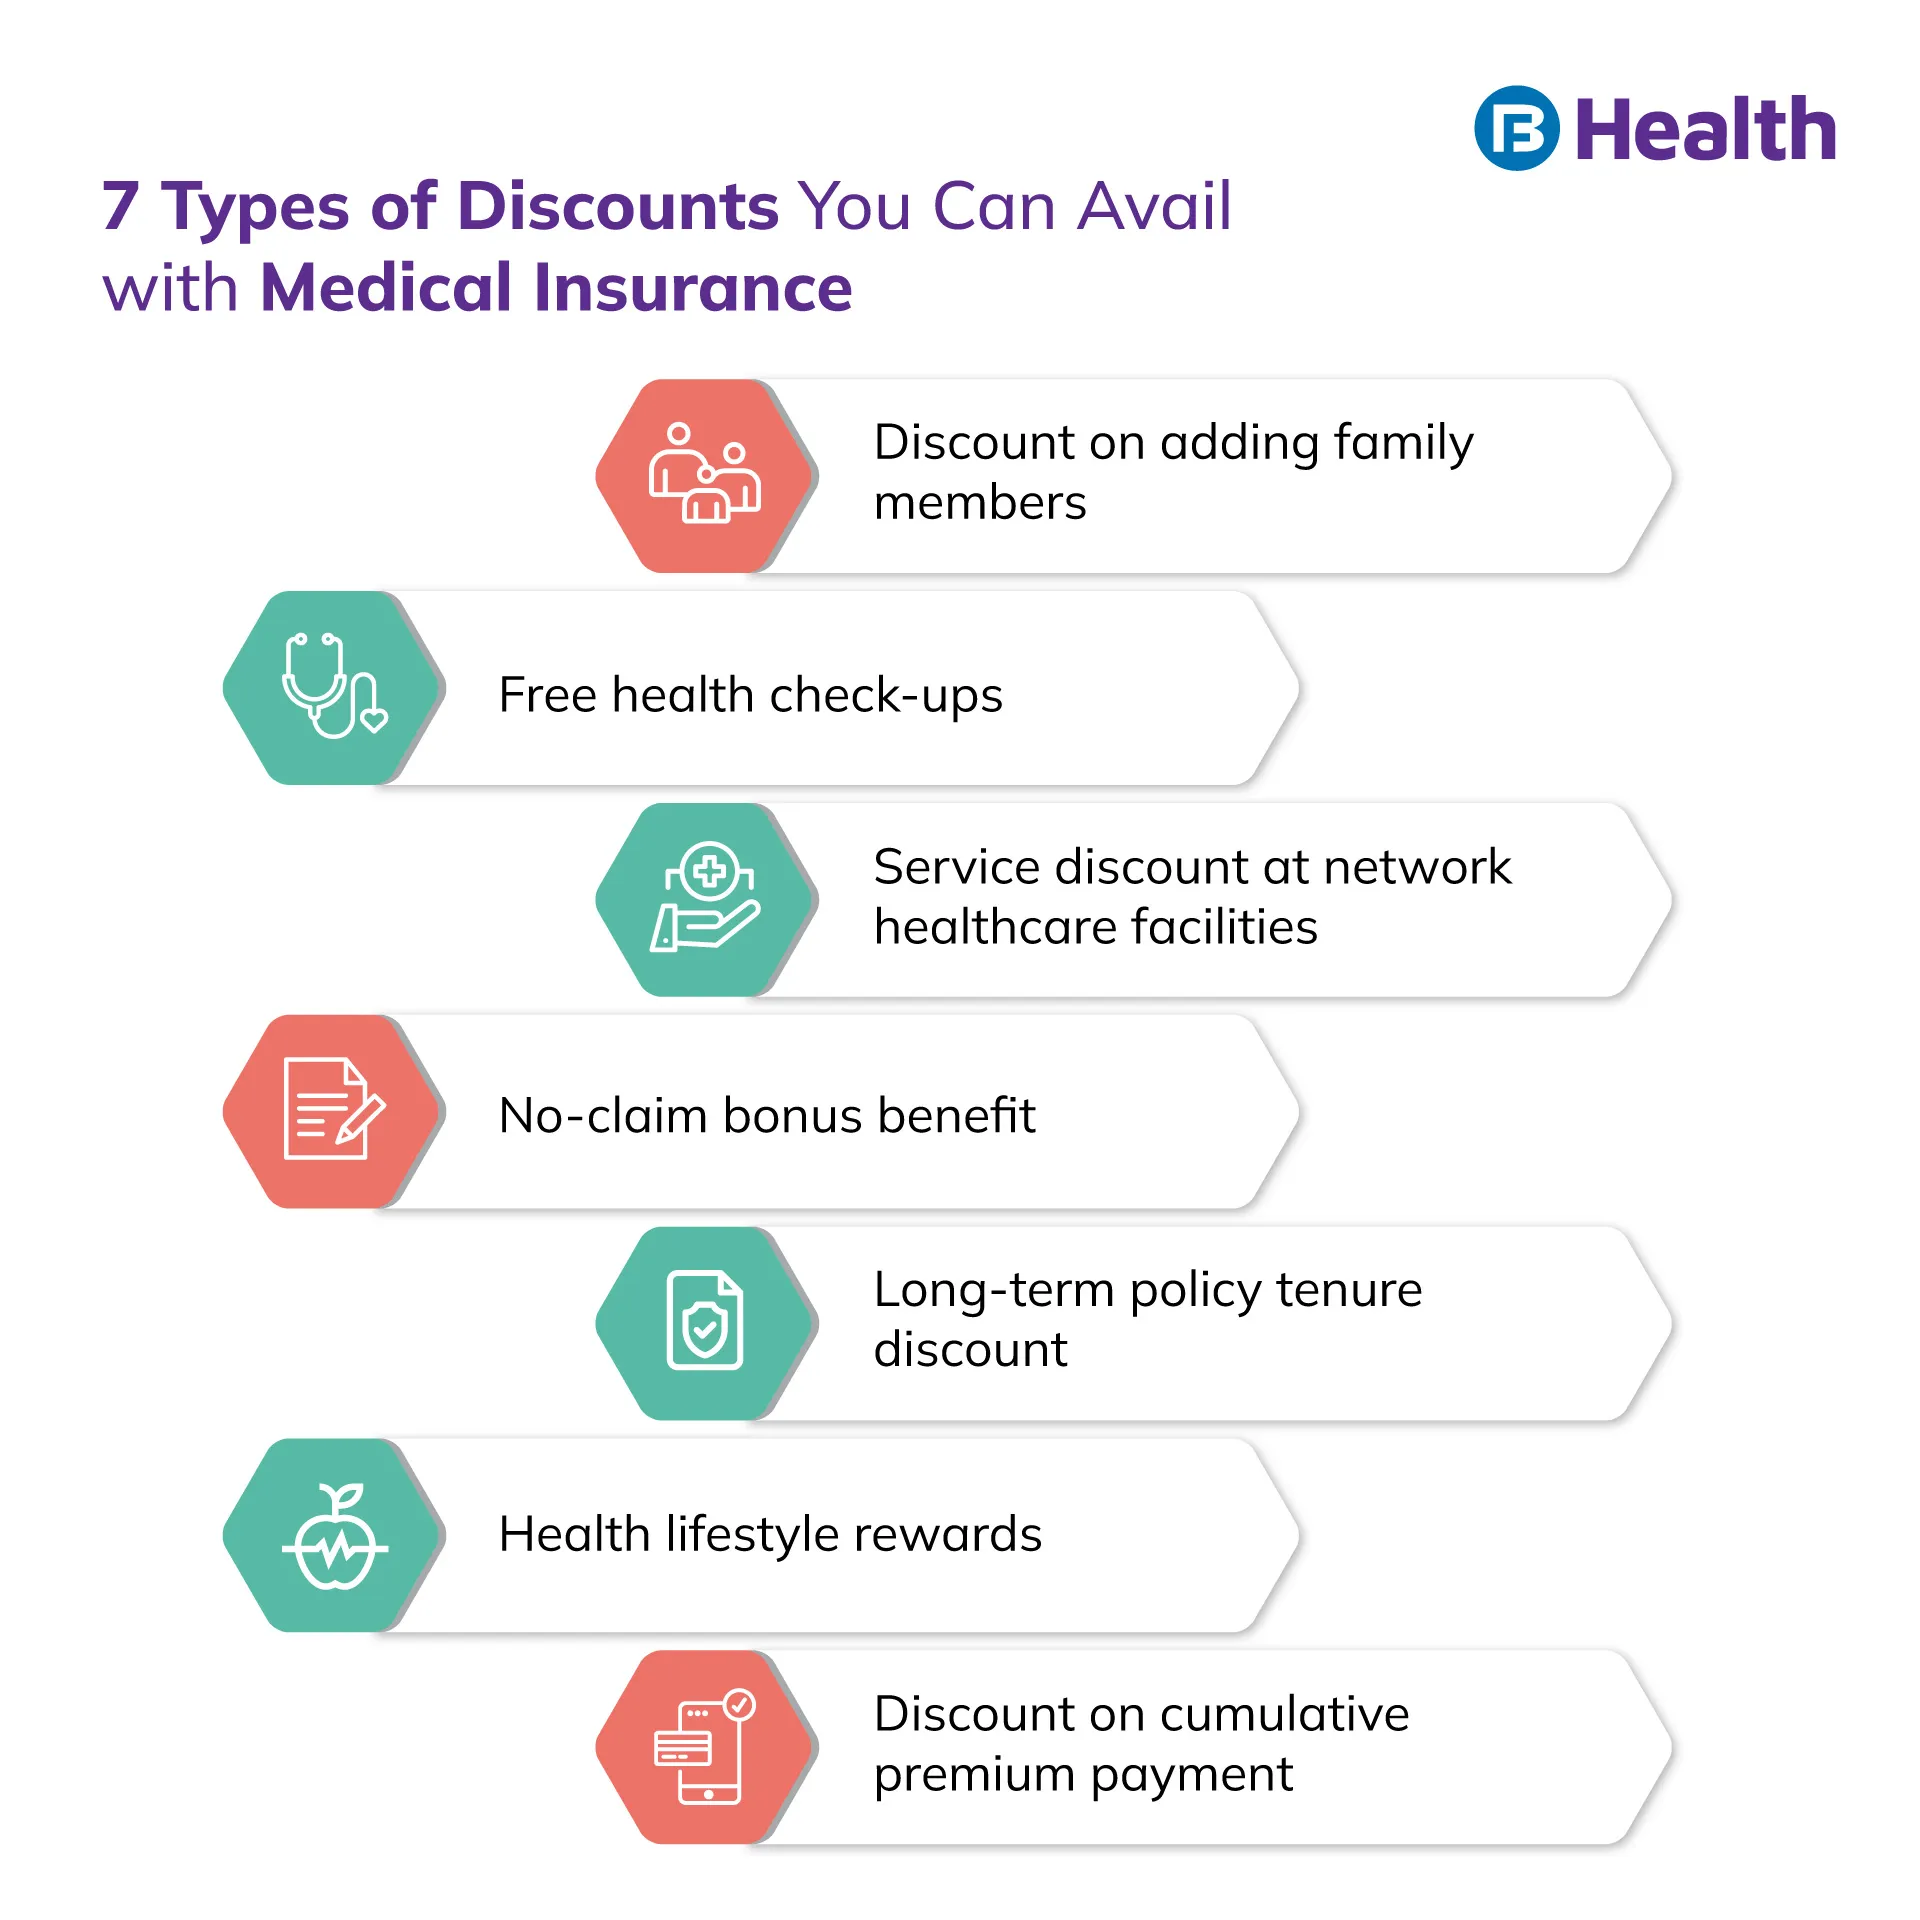 types of Discount on Medical insurance